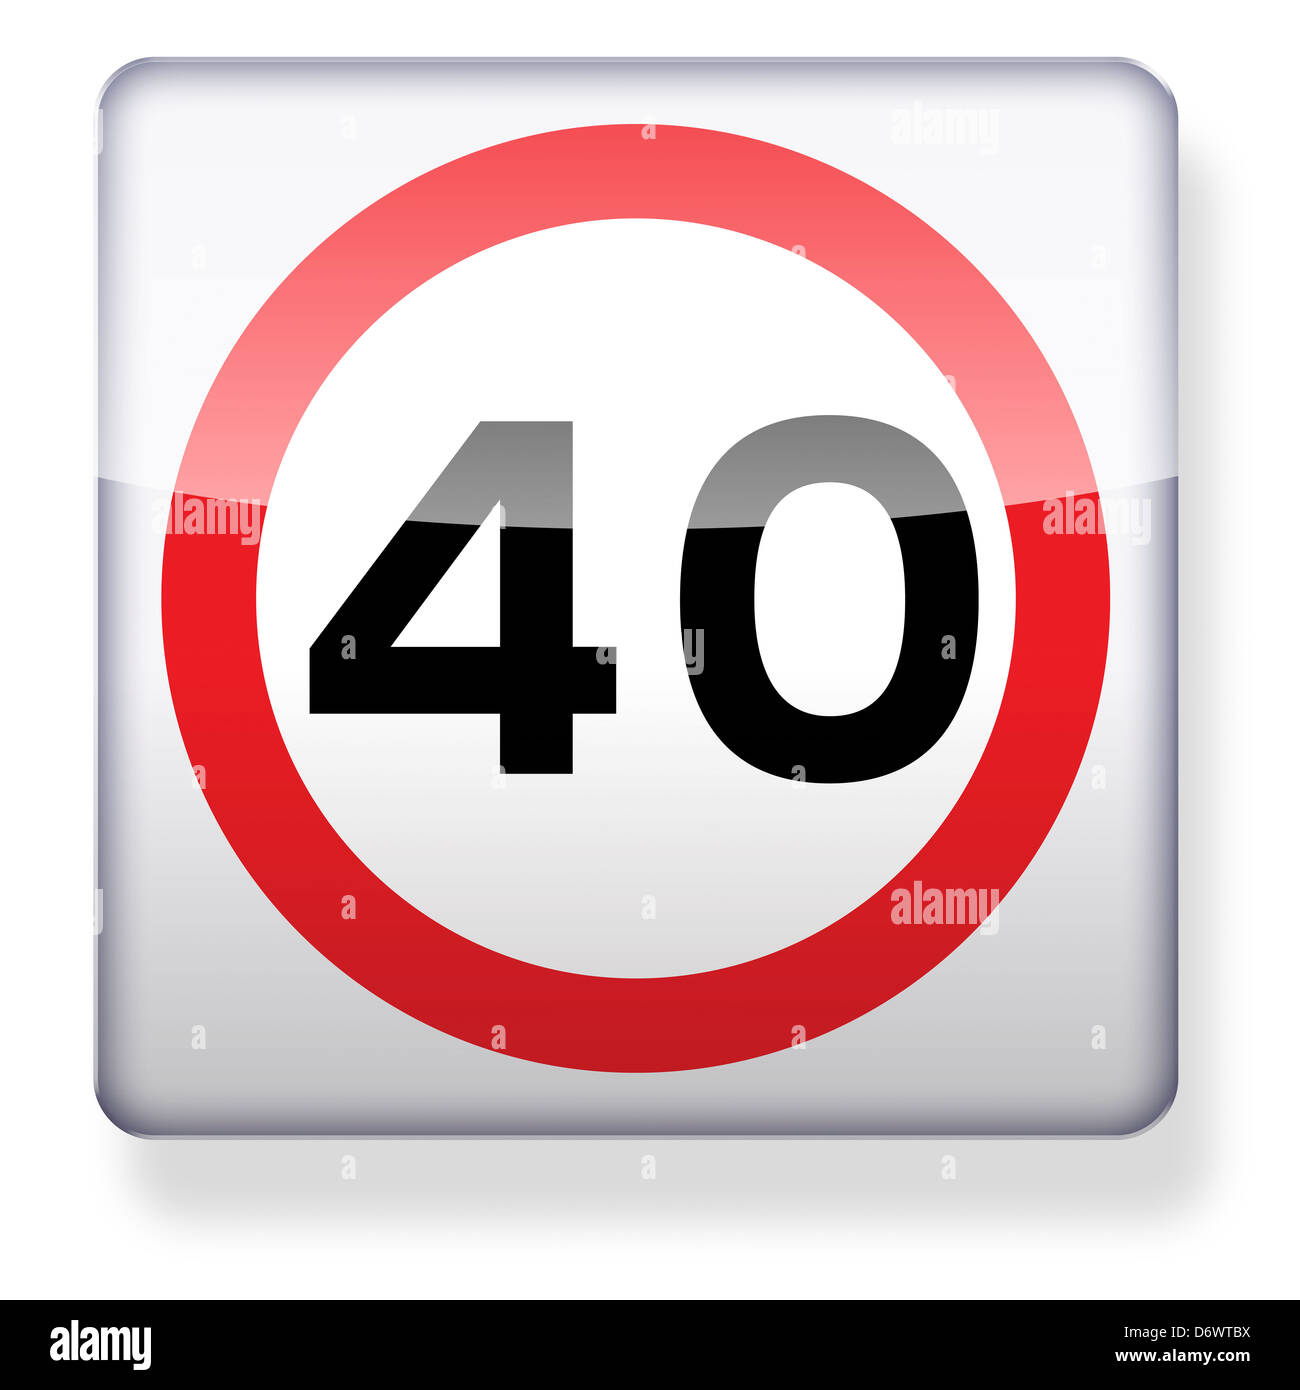 40 mph speed limit road sign as an app icon. Clipping path included. Stock Photo